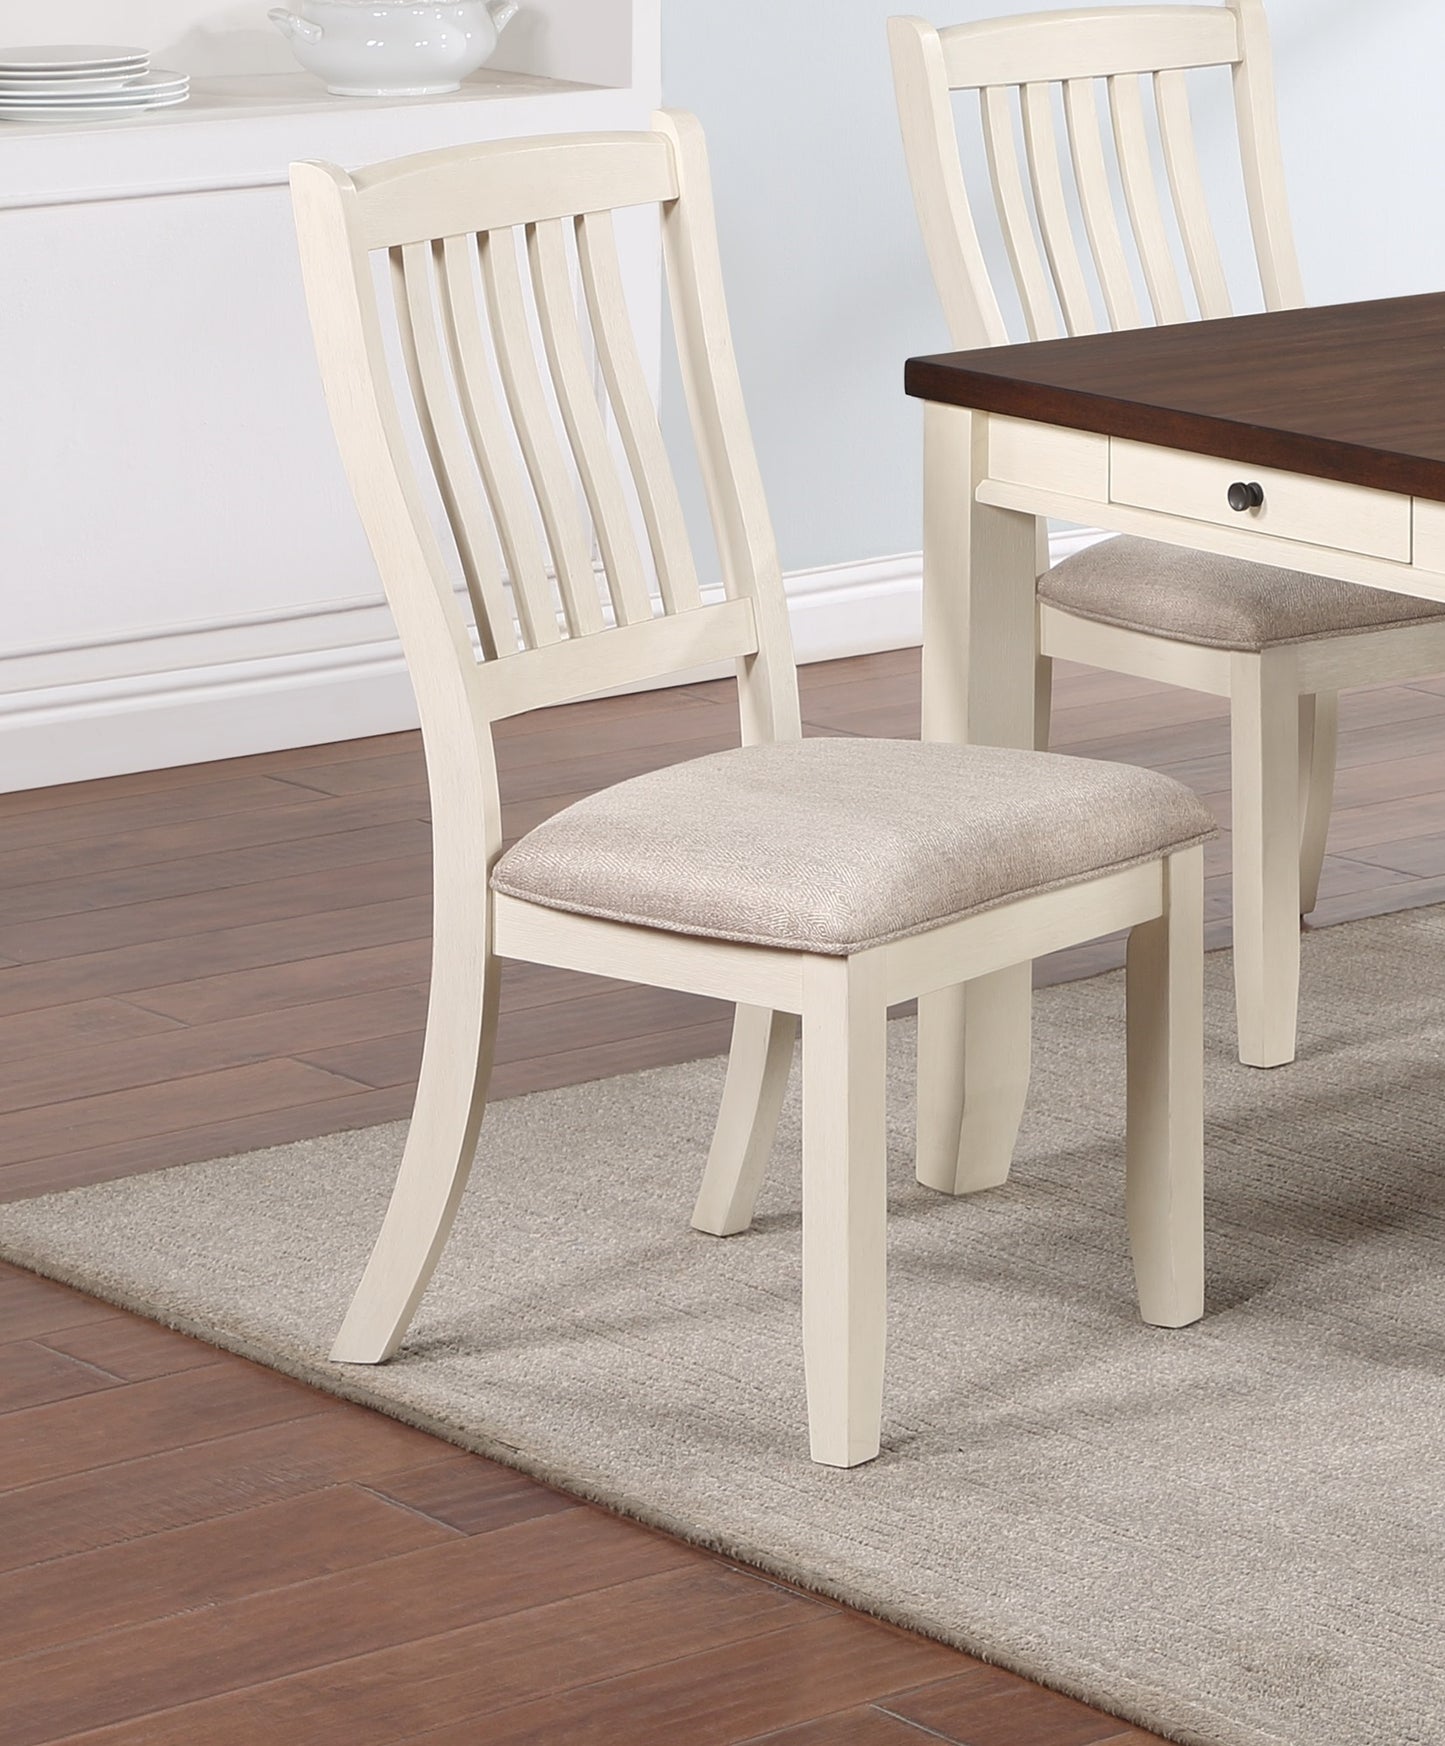 White Classic 2pcs Dining Chairs Set Rubberwood Beige Fabric Cushion Seats Slats Backs Dining Room Furniture Side Chair